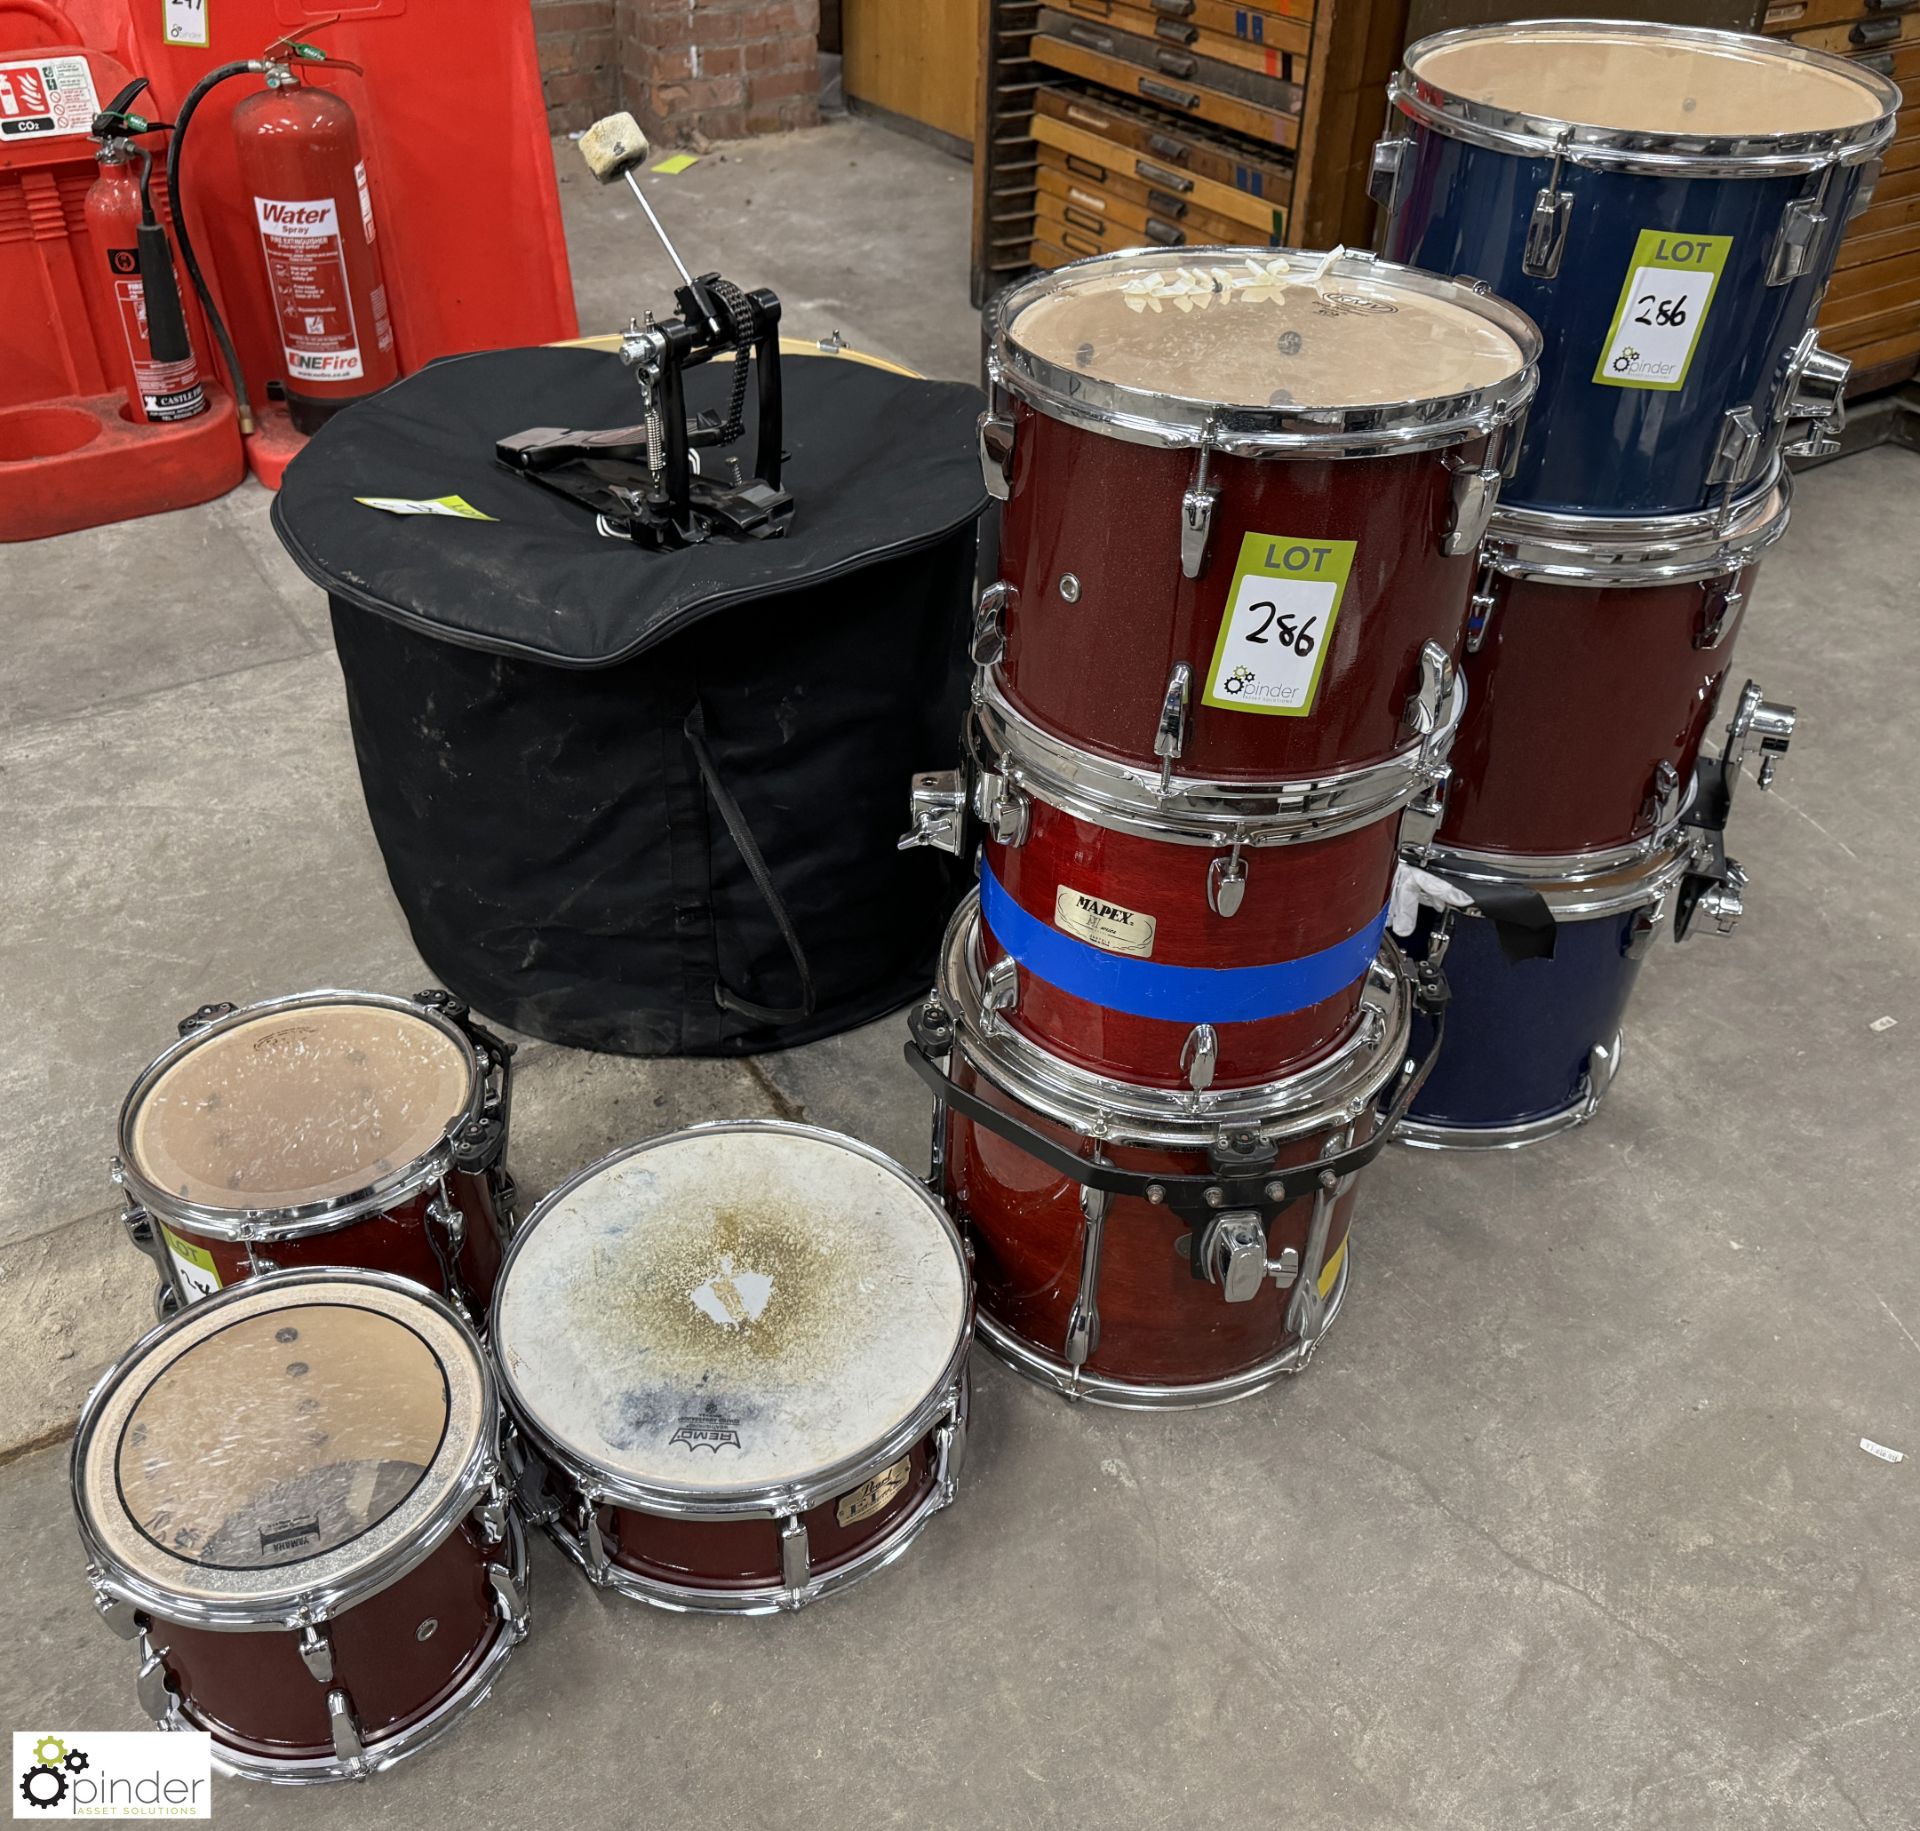 Quantity various Drums including Pearl bass drum, snares, side drums, toms, bass kicker and quantity